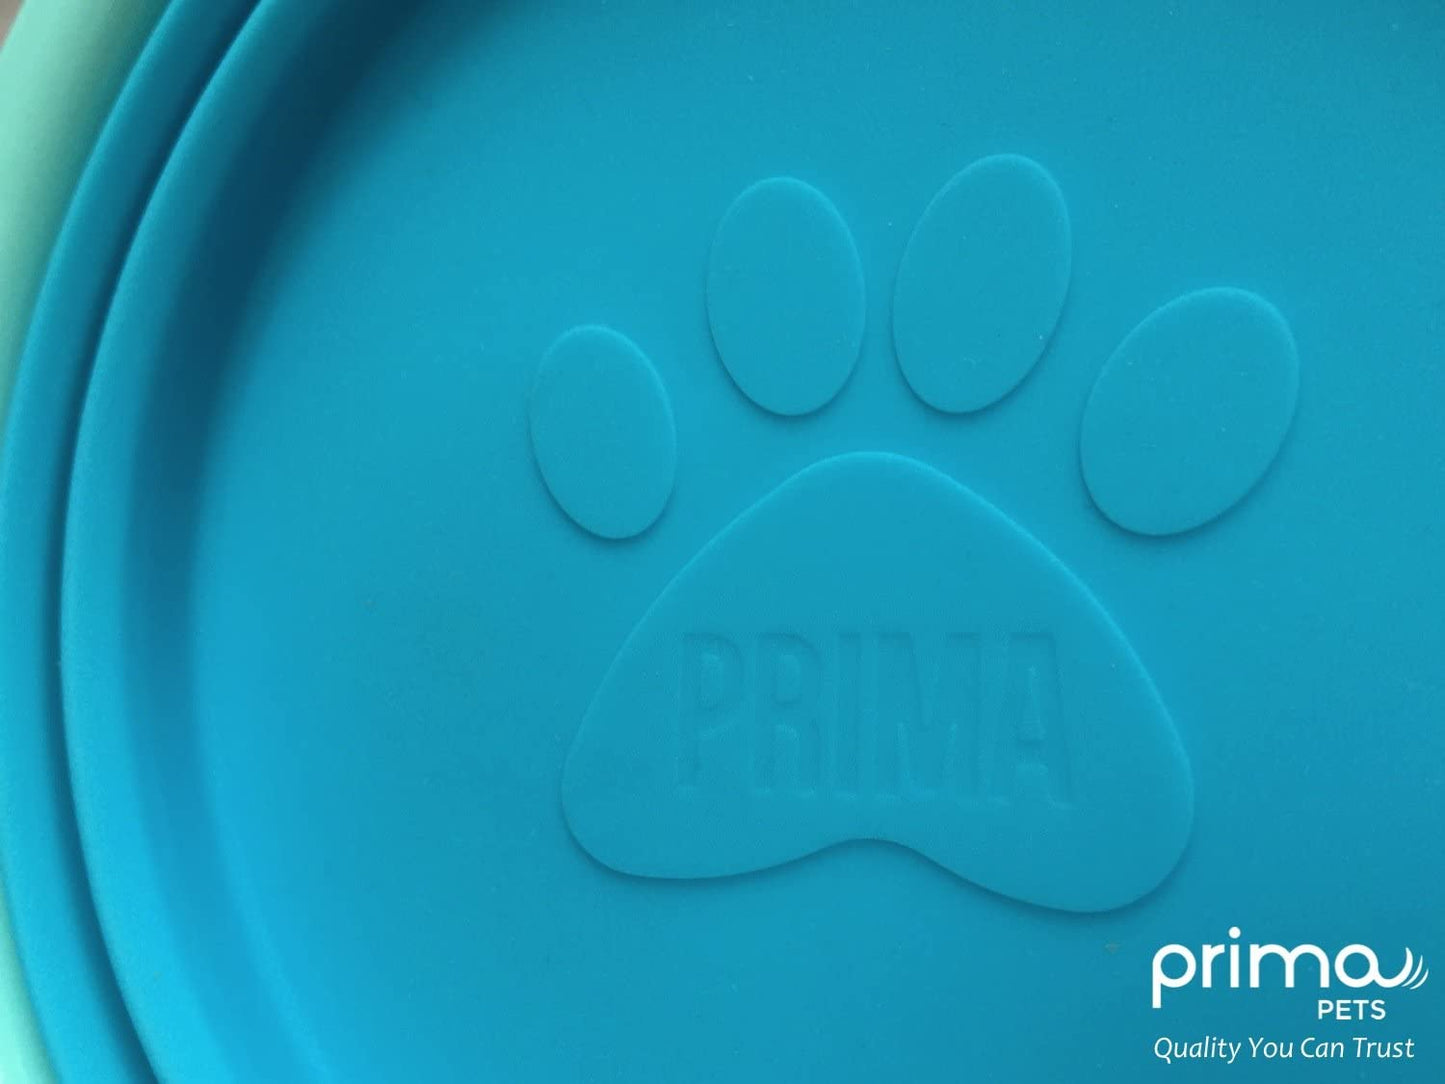 Prima Pet Expandable/ Collapsible Silicone Food & Water Travel Bowl with Clip for Small & Medium Dog and Cat, Size: 1.5 Cups (5.1 Inch Diameter Bowl) (AQUA) - (For 12 piece(s))